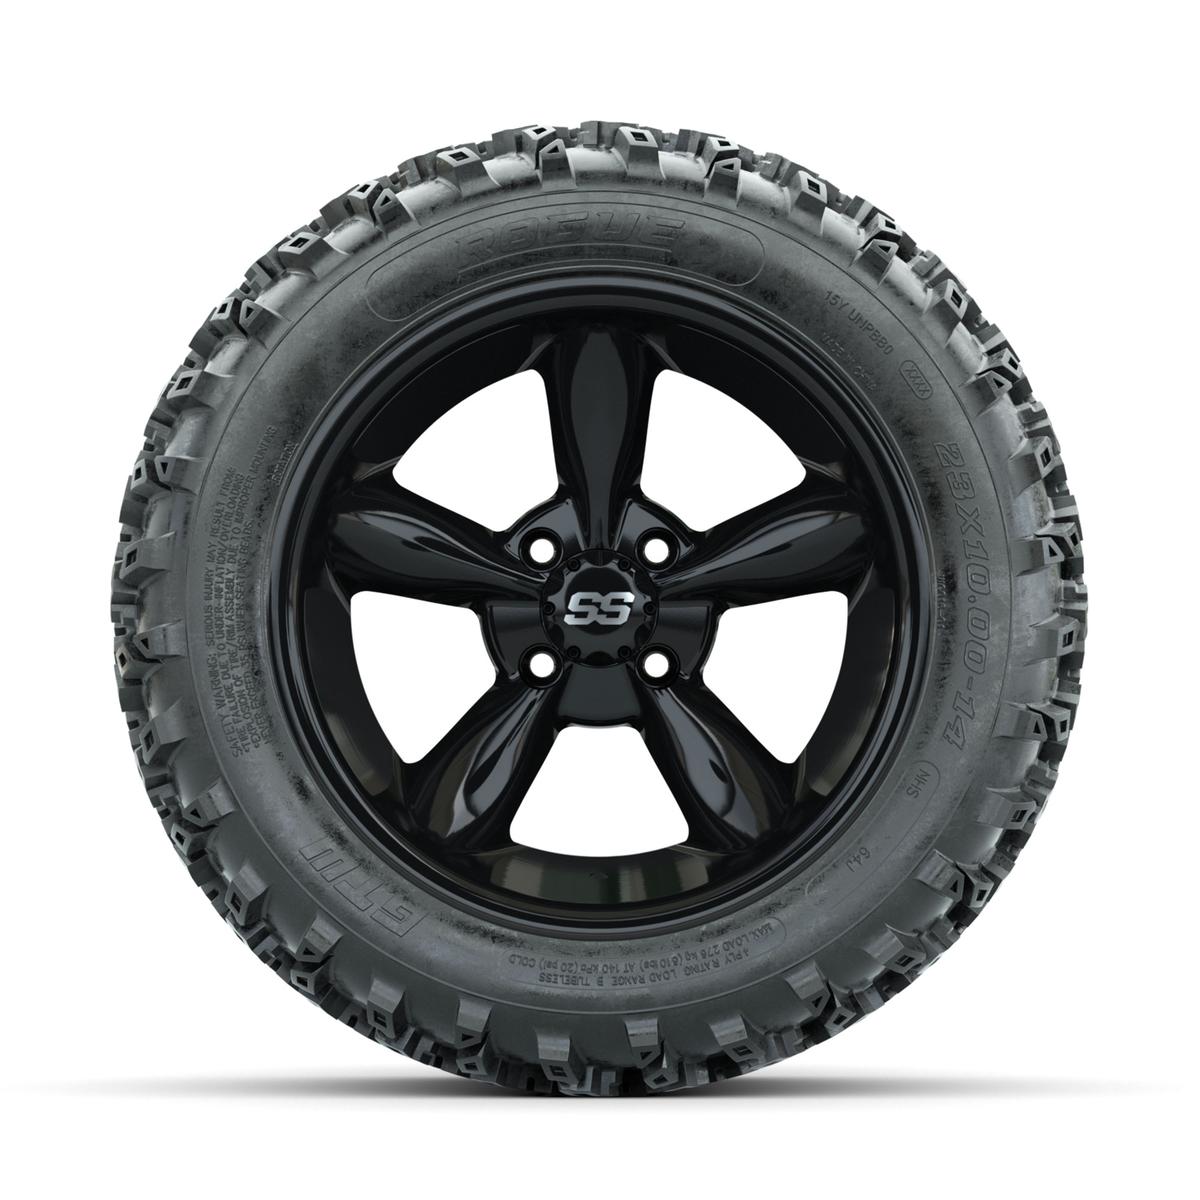 GTW Godfather Black 14 in Wheels with 23x10.00-14 Rogue All Terrain Tires – Full Set